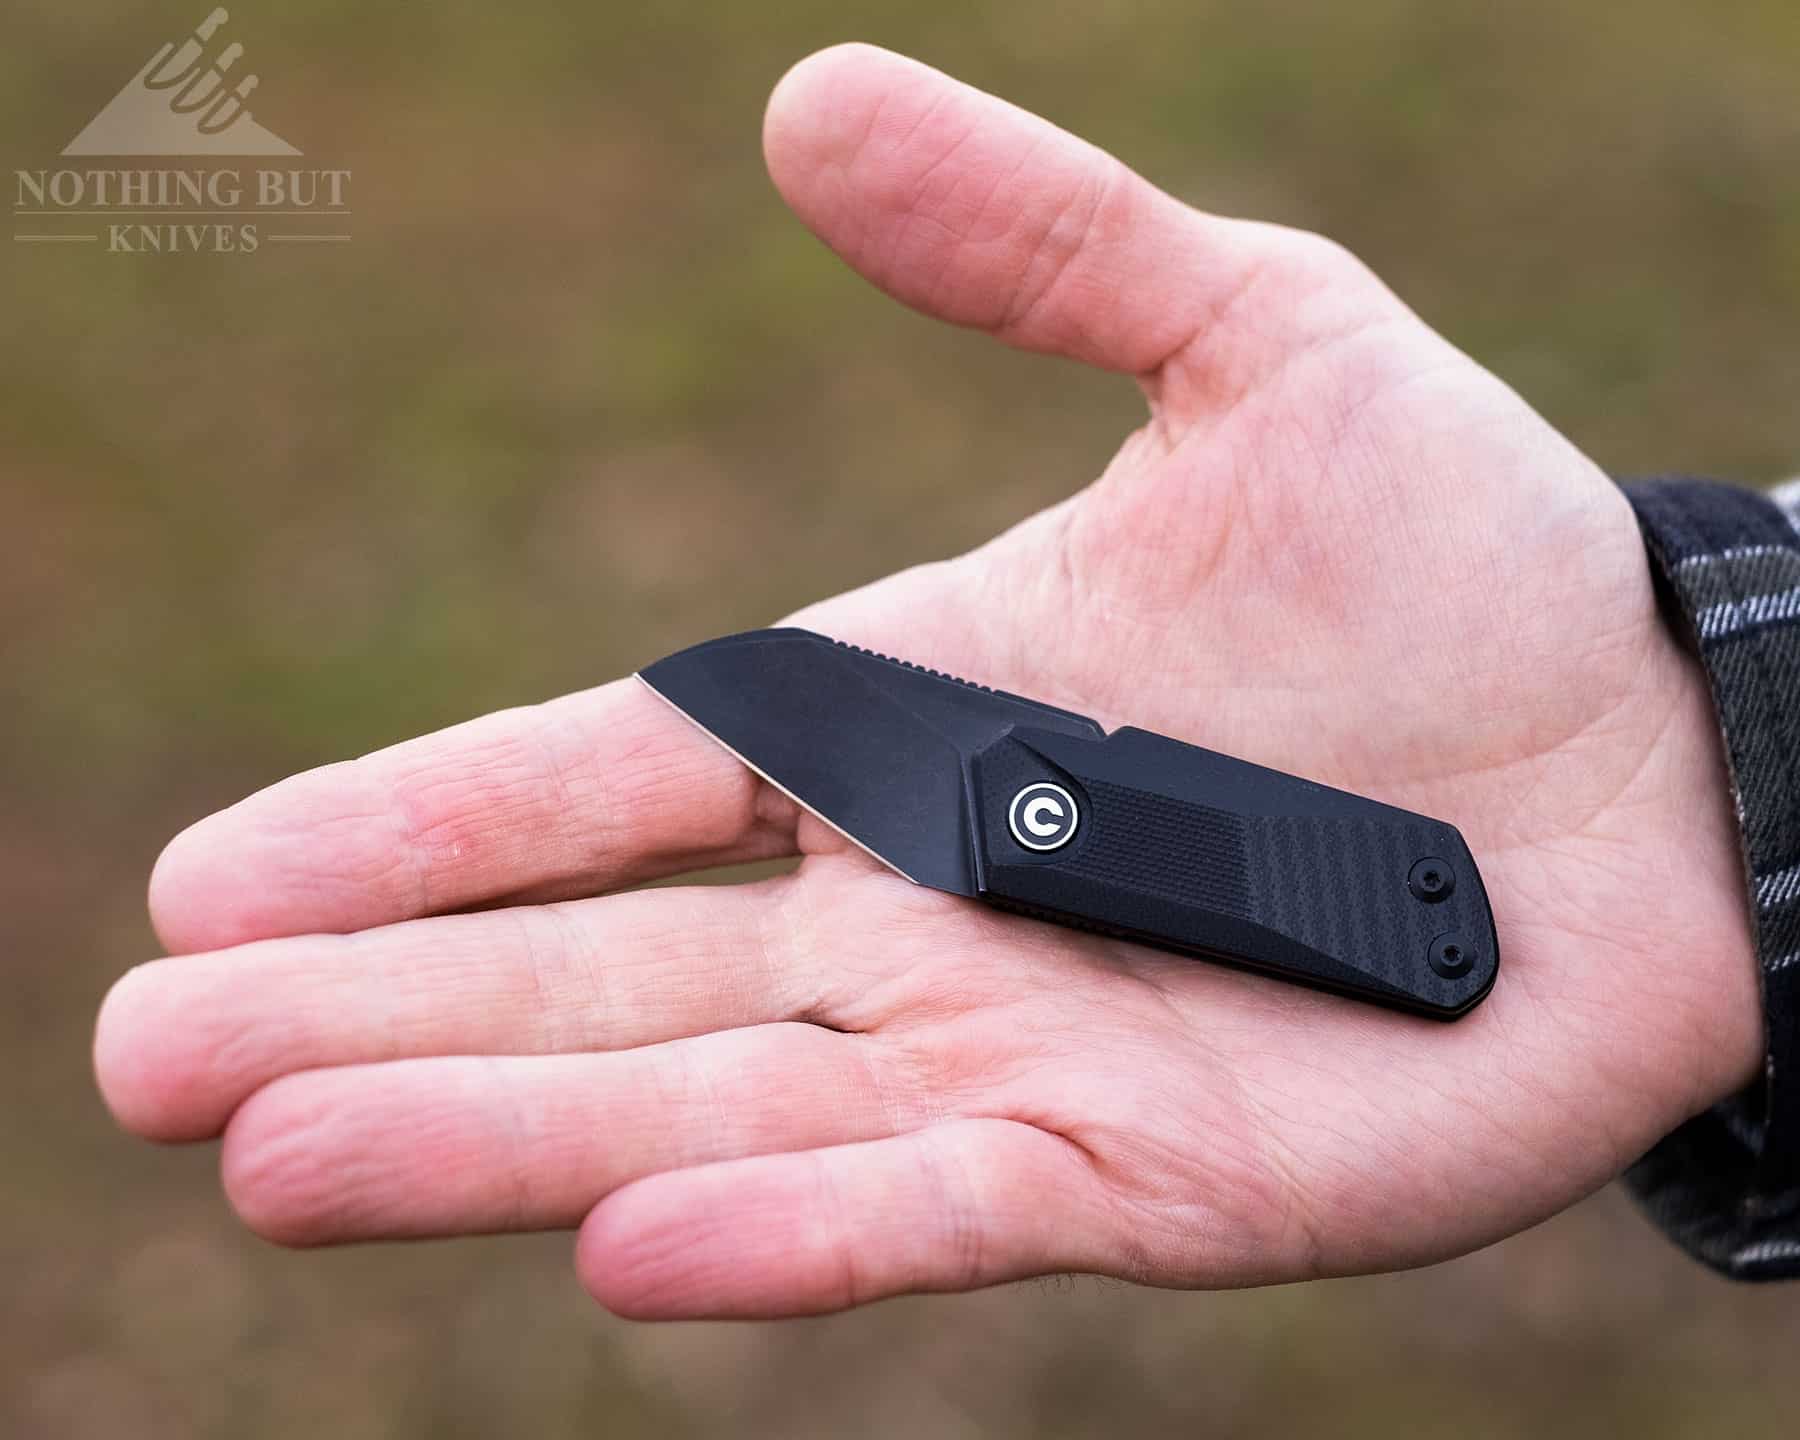 The Ki-V is small but practical for most tasks a knife is actually used for. 